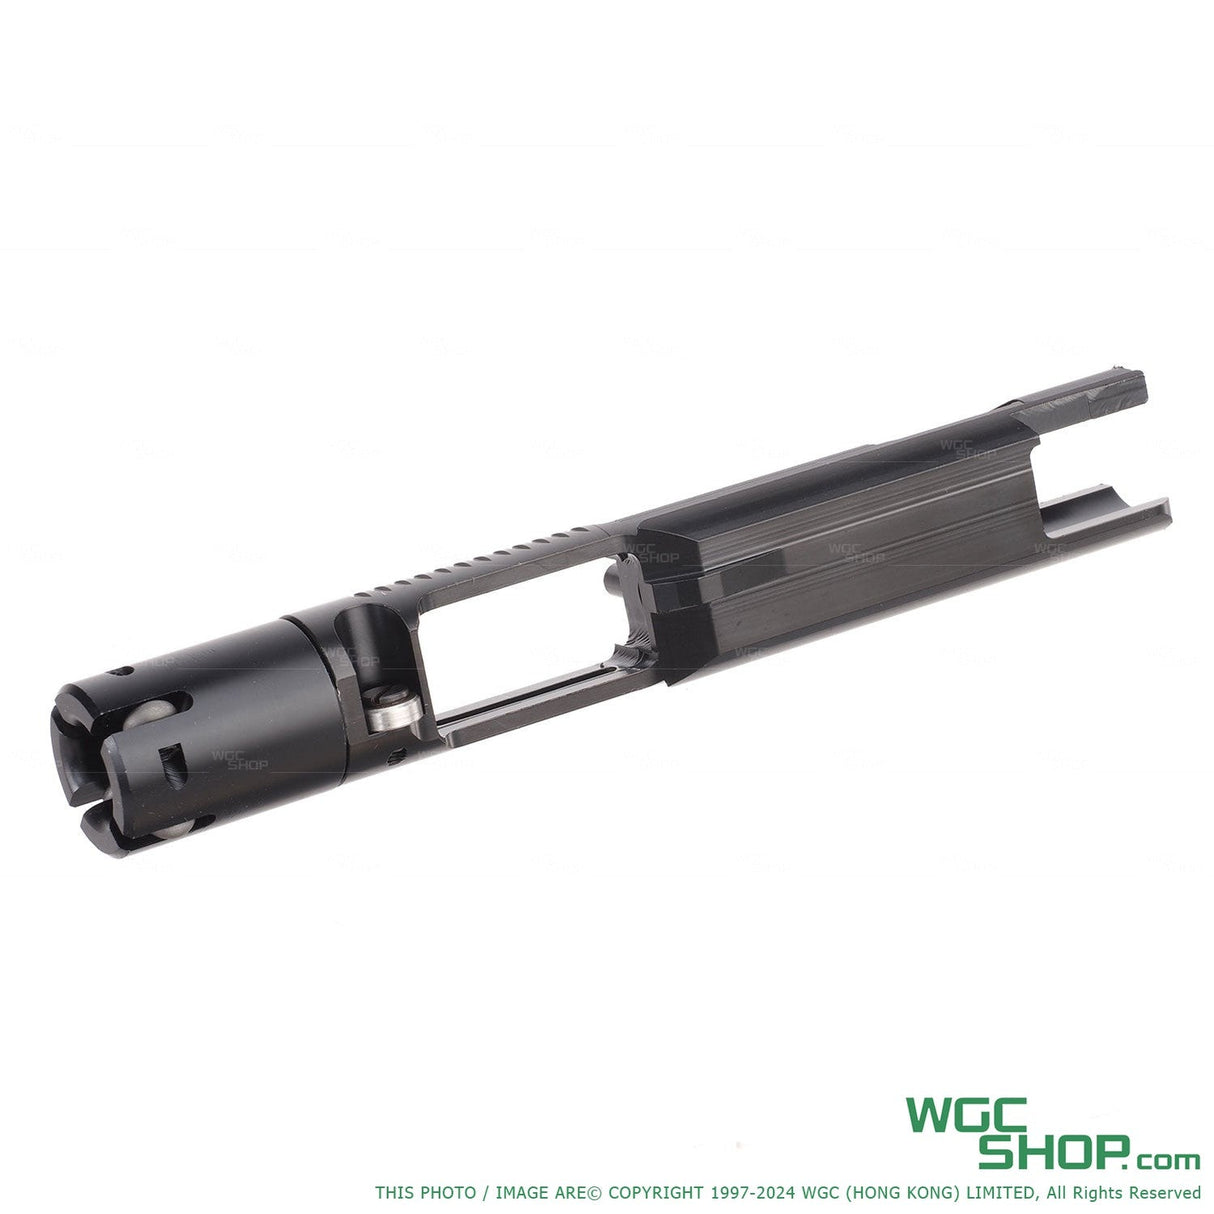 GUNDAY R Style Lightweight Steel Bolt Carrier for Marui MWS + Unicorn Nozzle Set